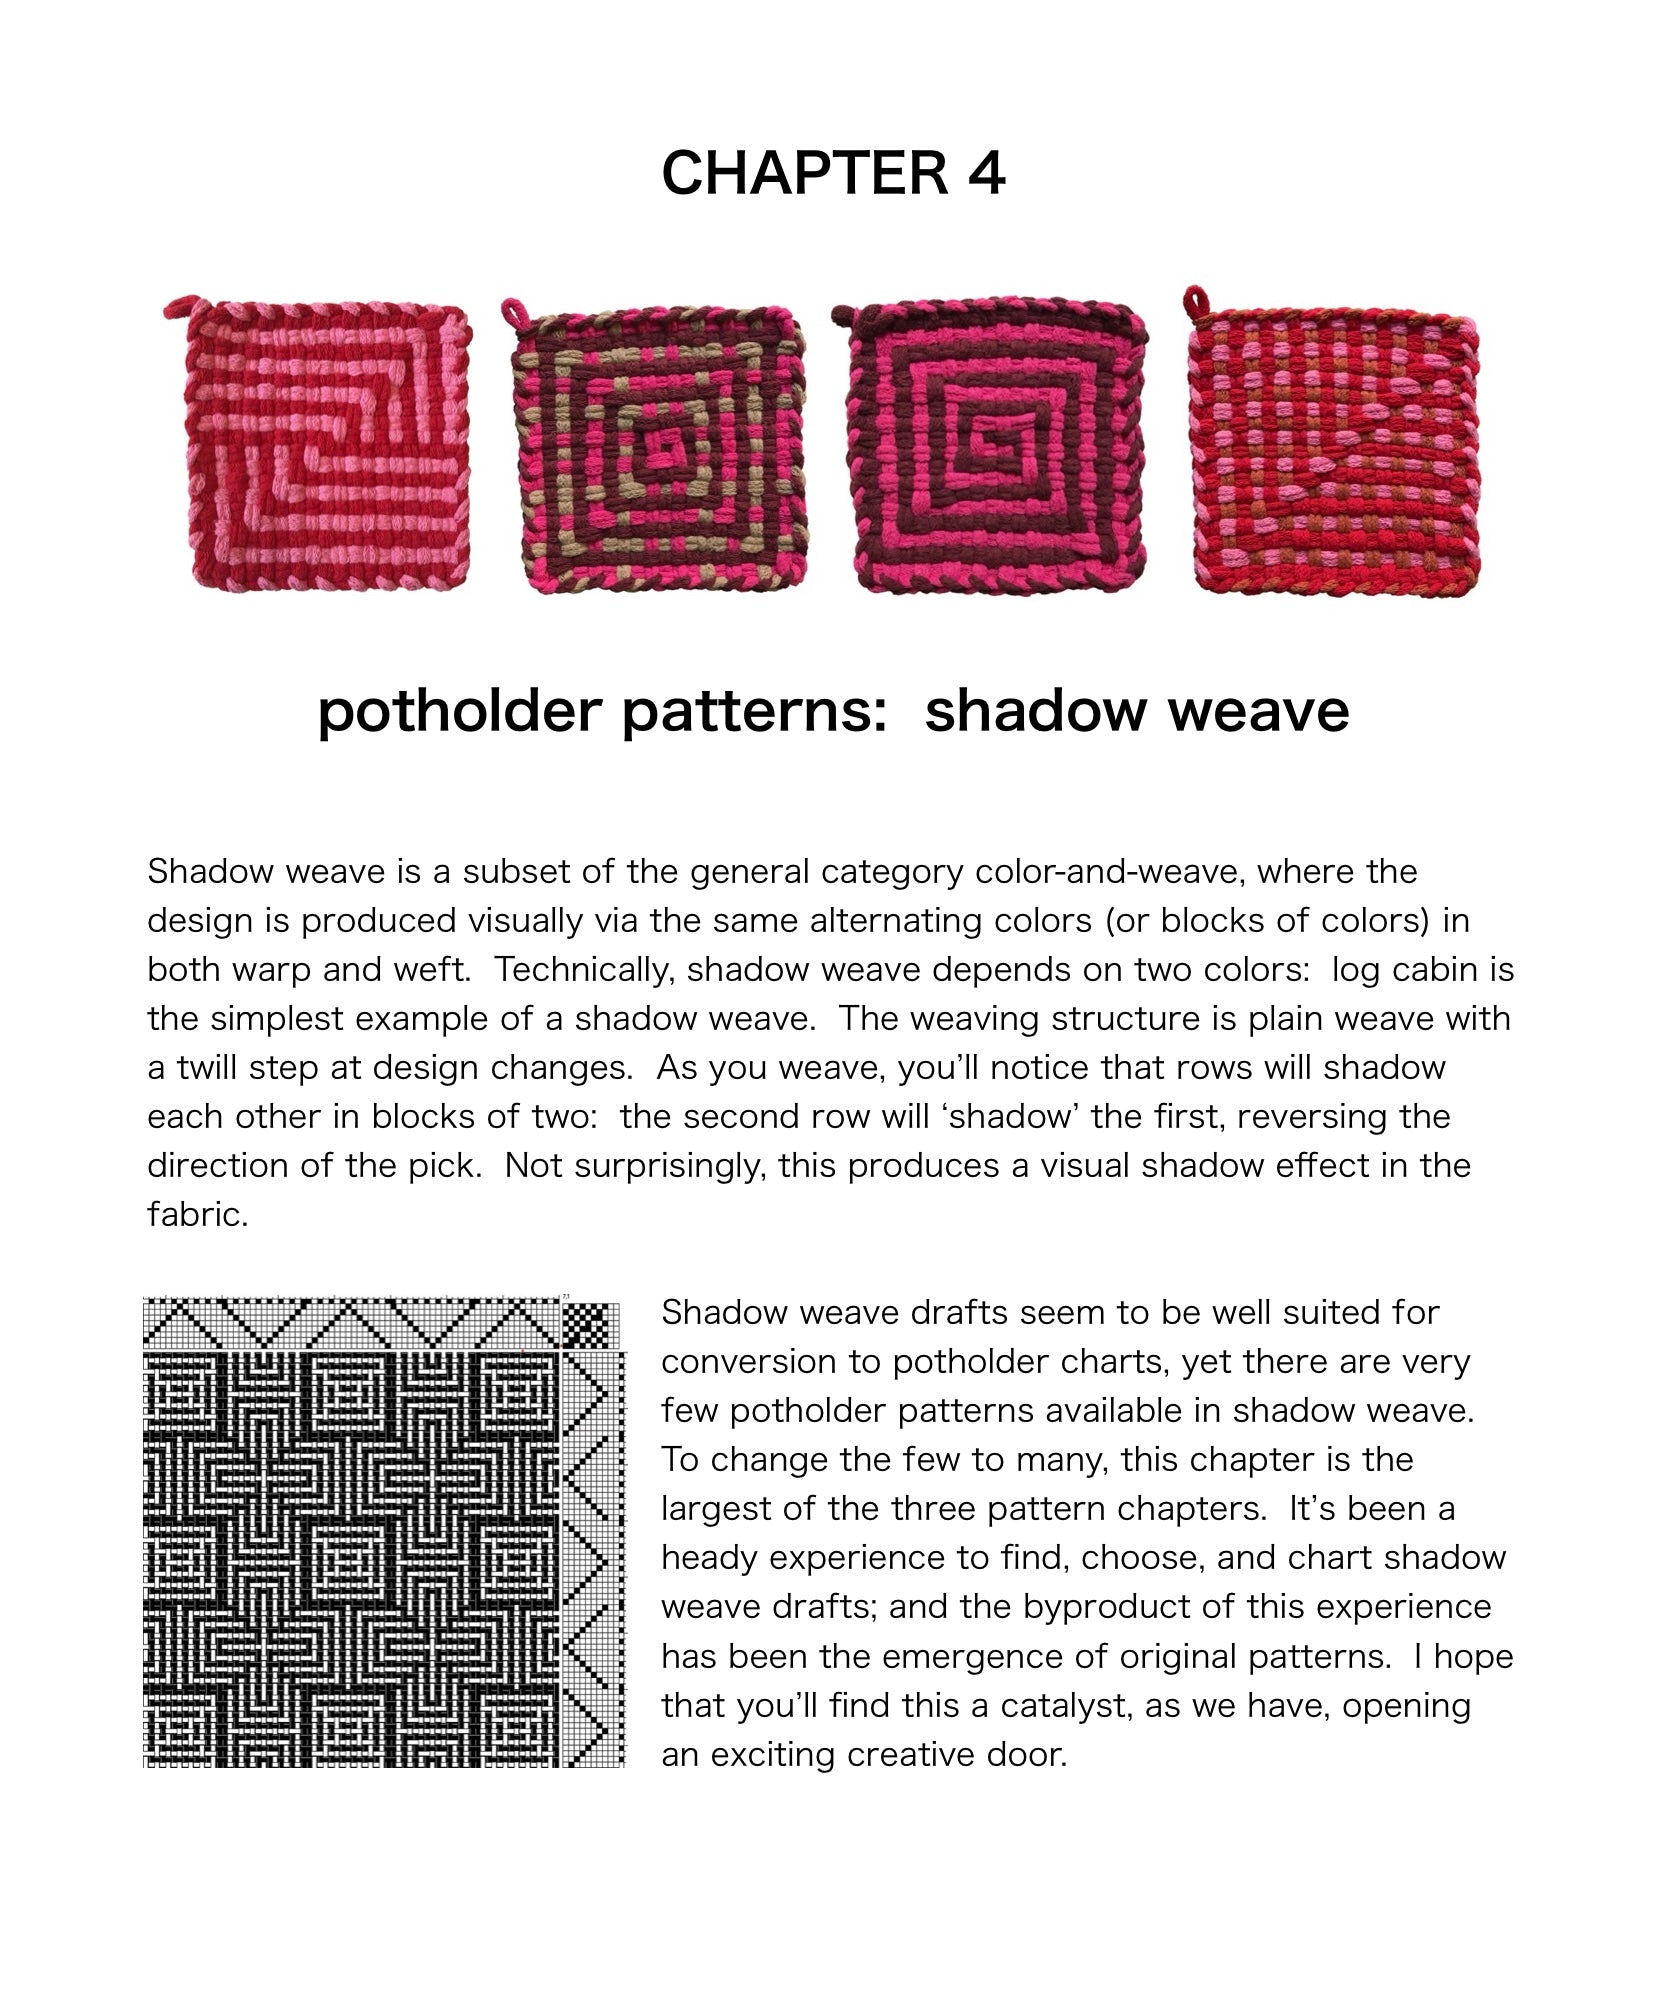 In the Loop: Radical Potholder Patterns and Techniques book by Deborah Jean Cohen